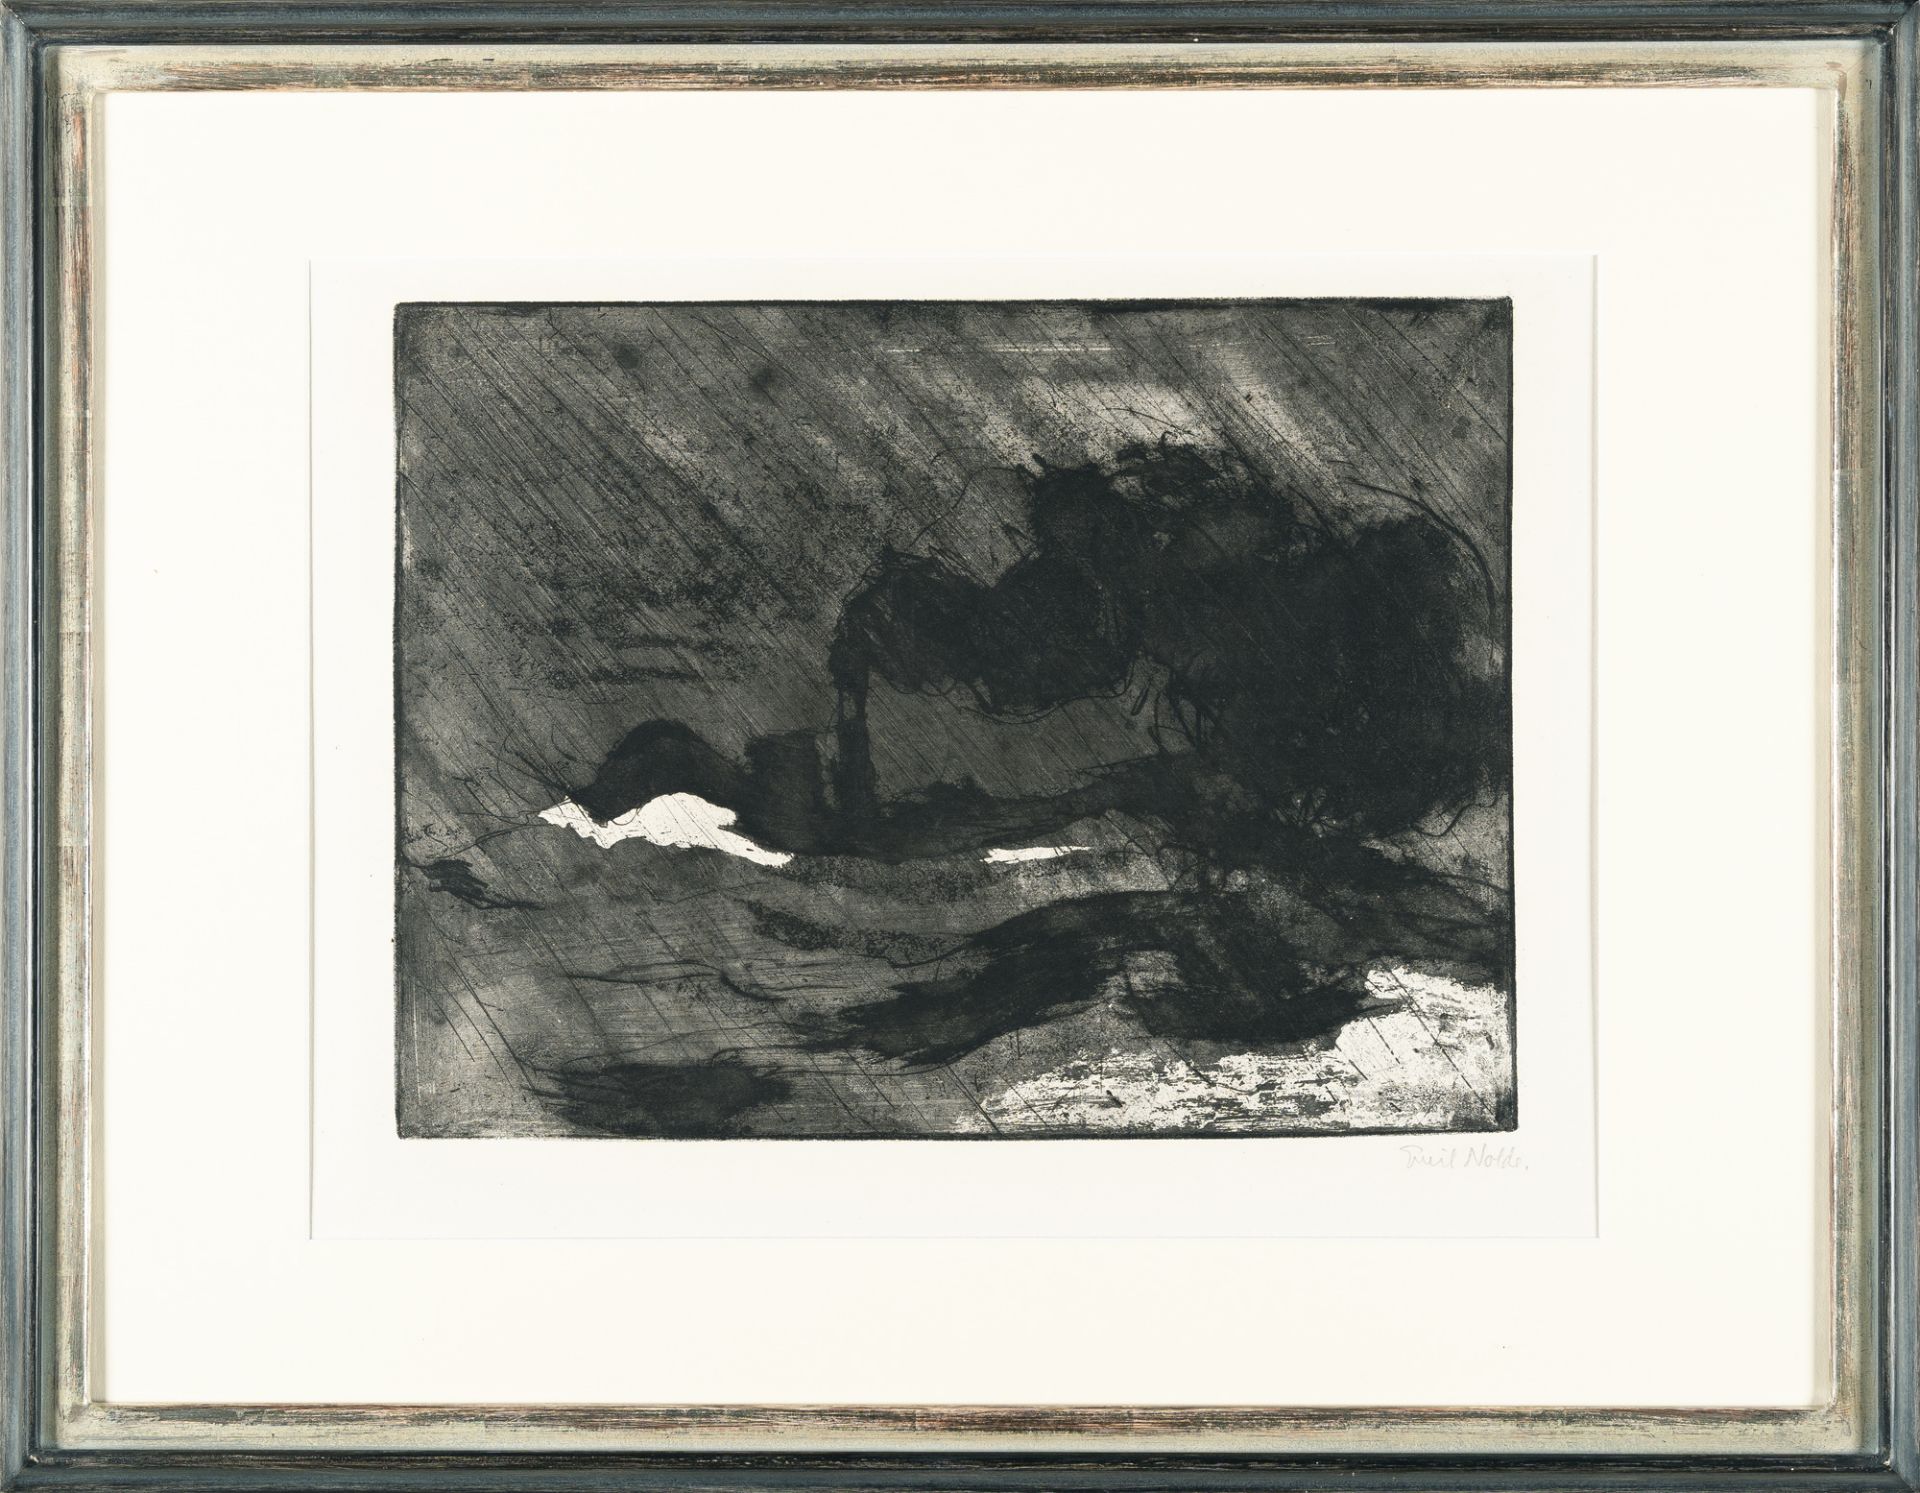 Emil Nolde (1867 Nolde - Seebüll 1956), “Steam ship (gr. Dkl.)”Etching with aquatint and tone - Image 4 of 4